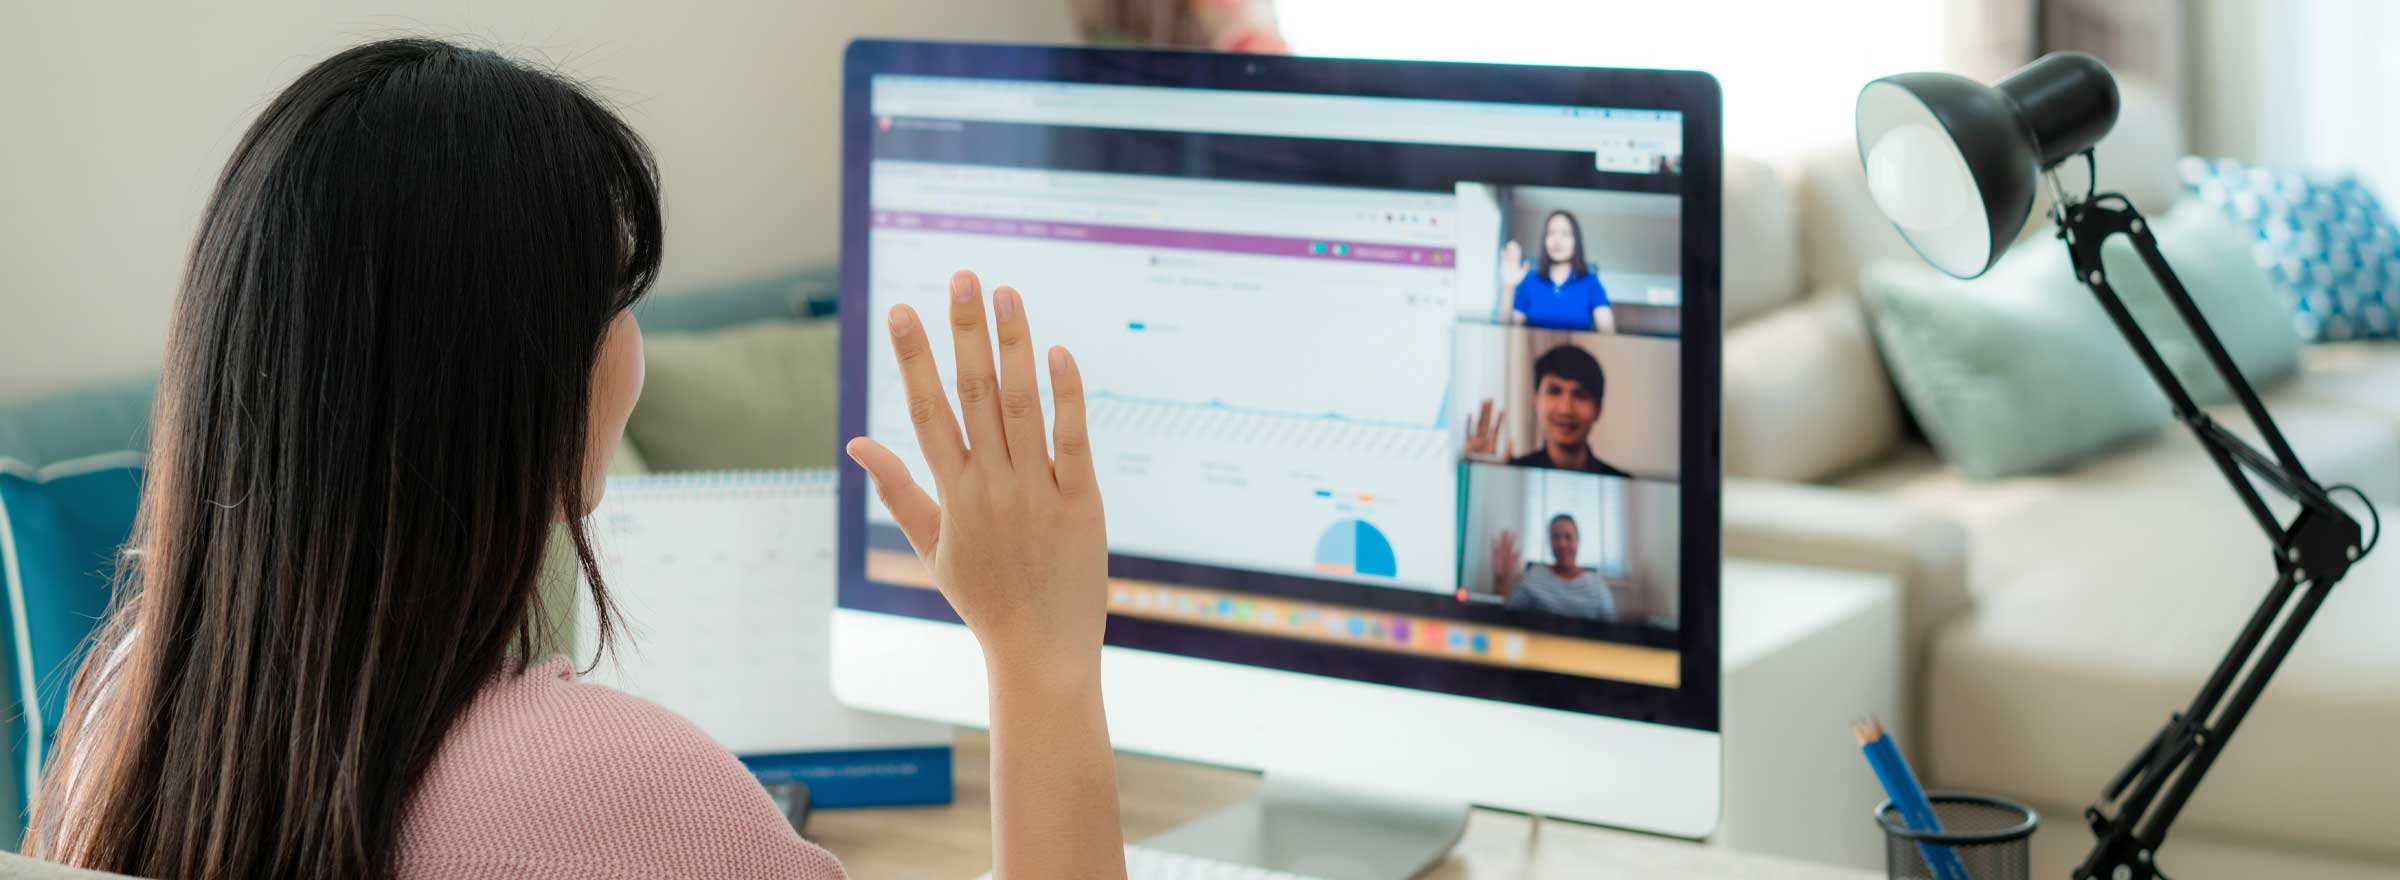 woman waving at participants in an online meeting